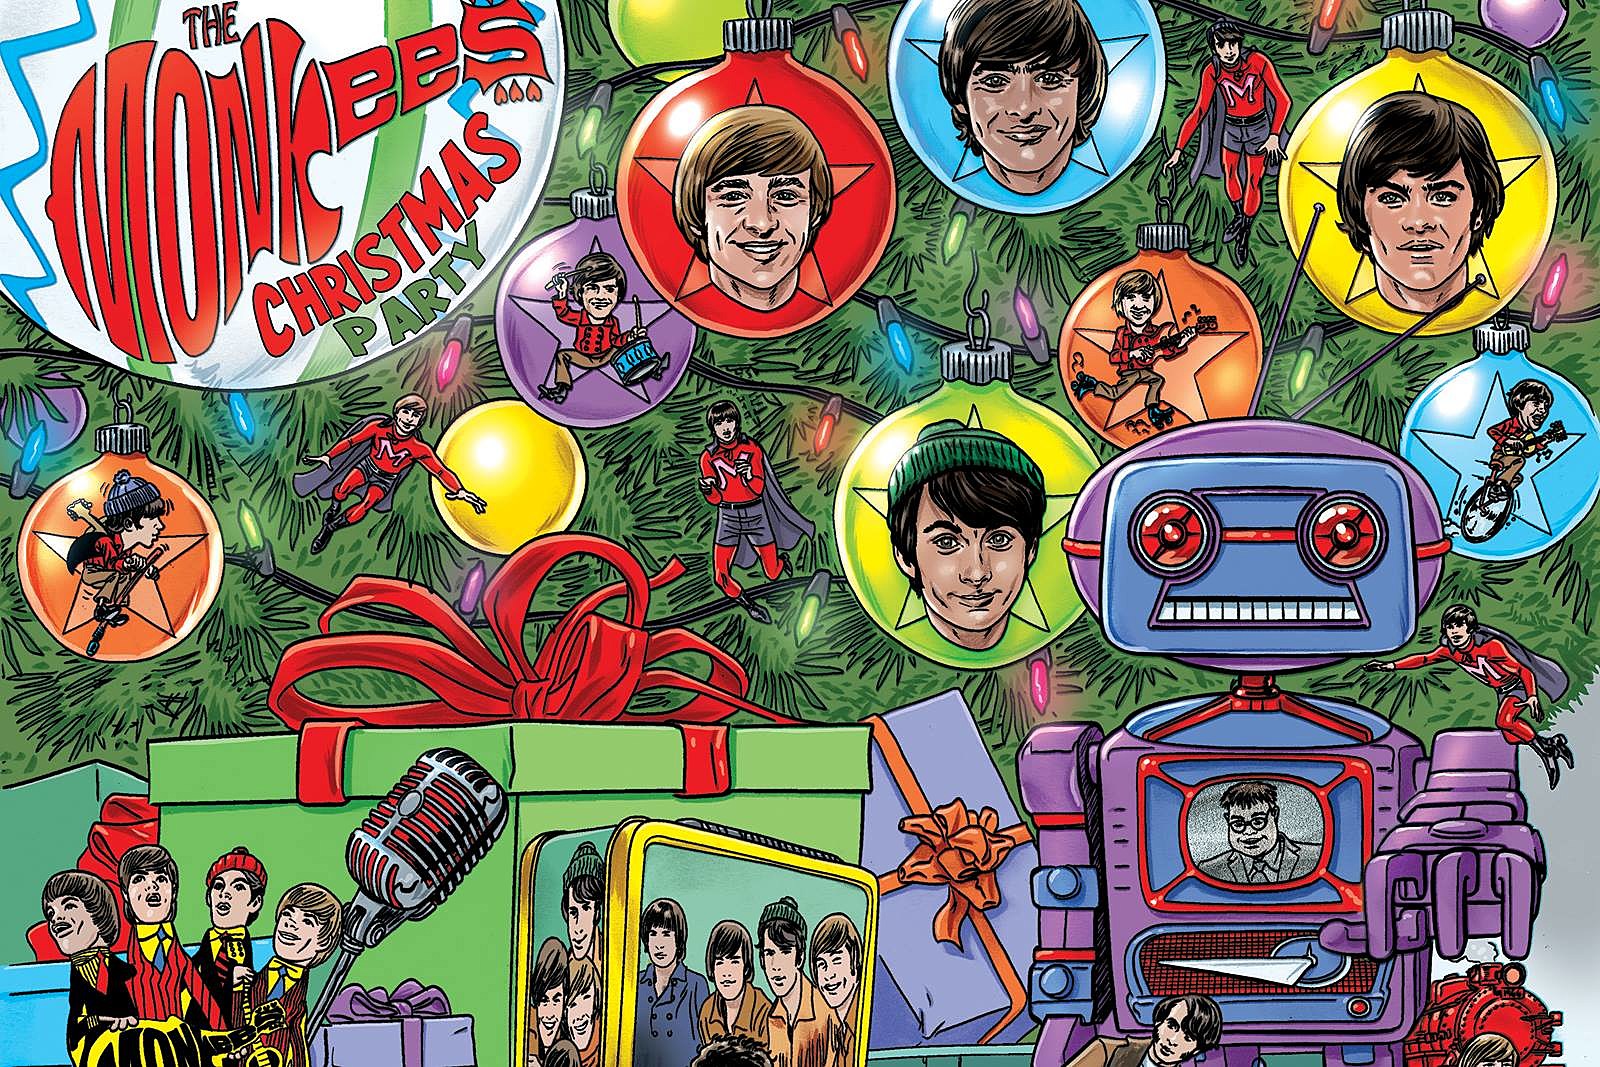 The Monkees' 'Christmas Party' Set for Release